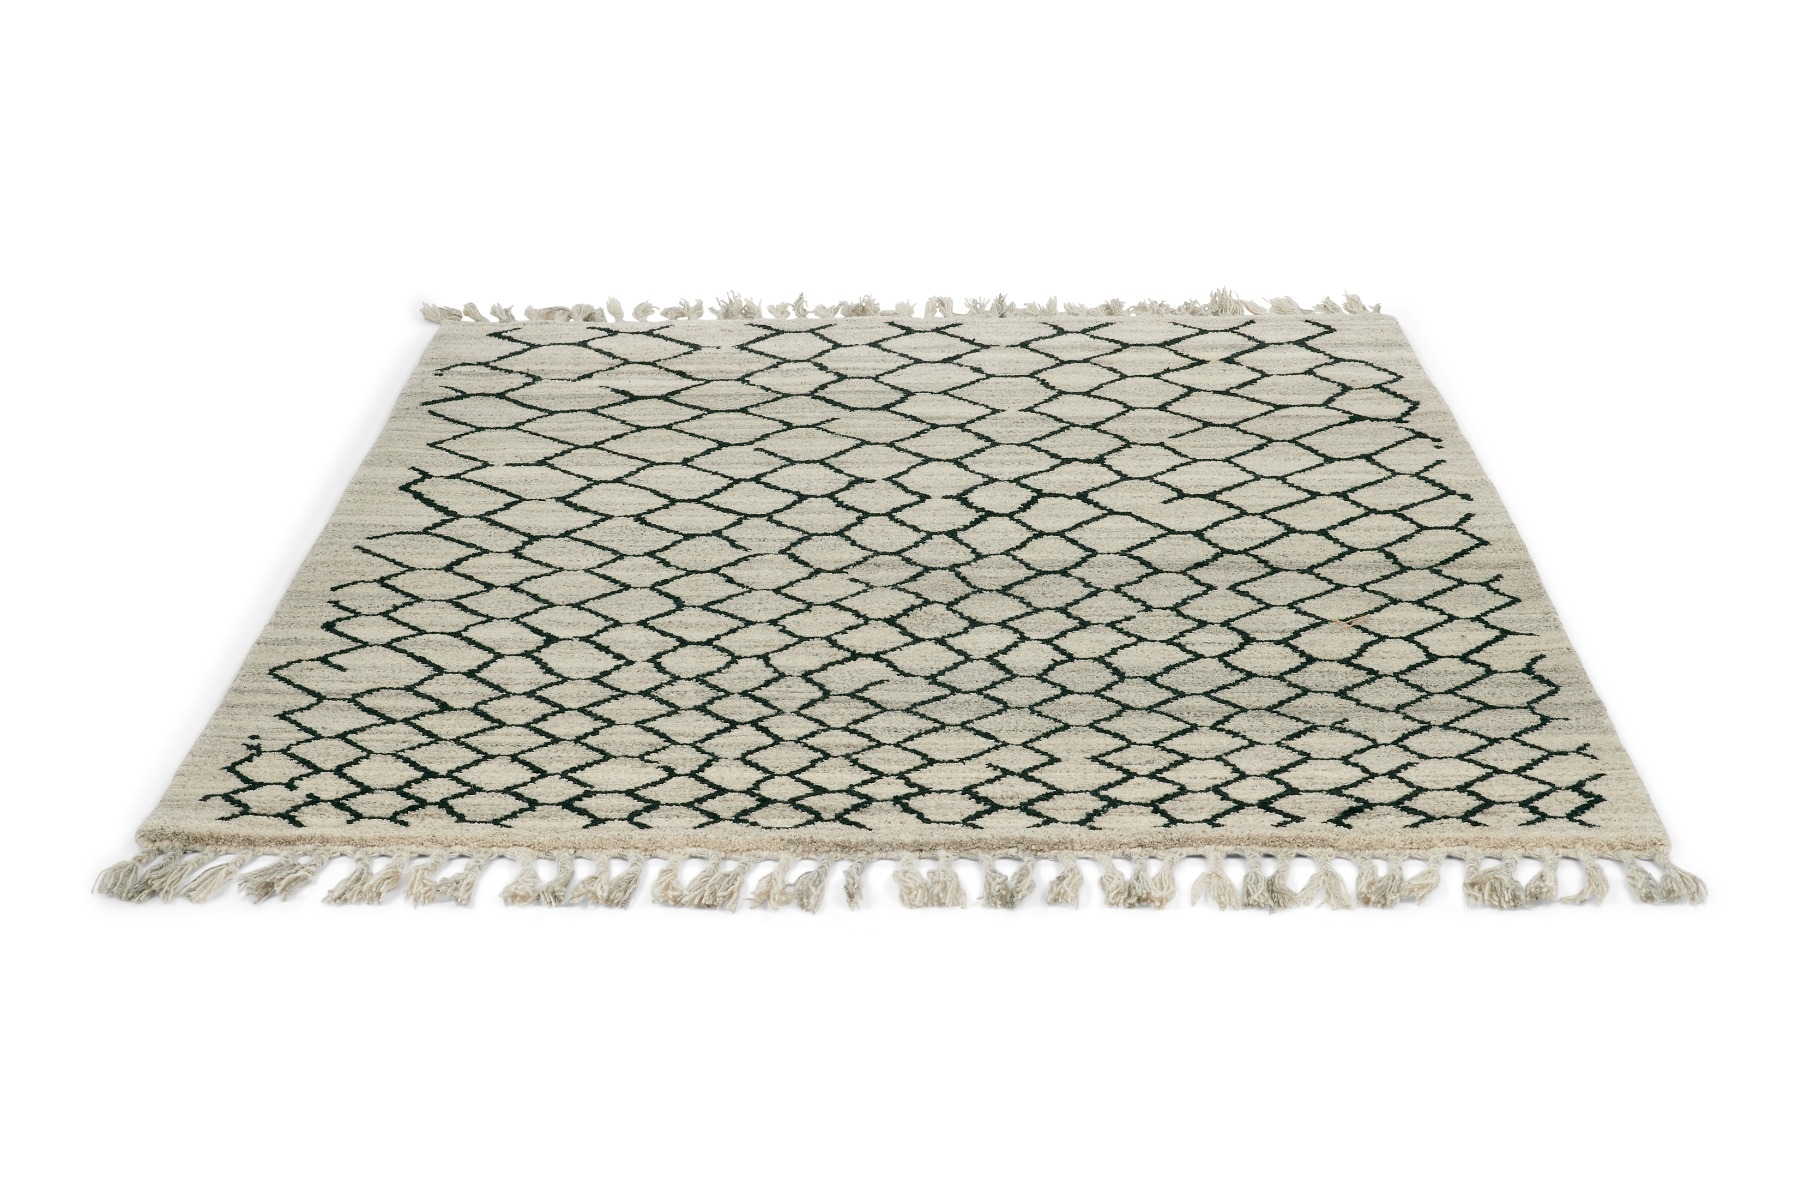 Hexacon Handknotted Rug ☞ Size: 140 x 200 cm